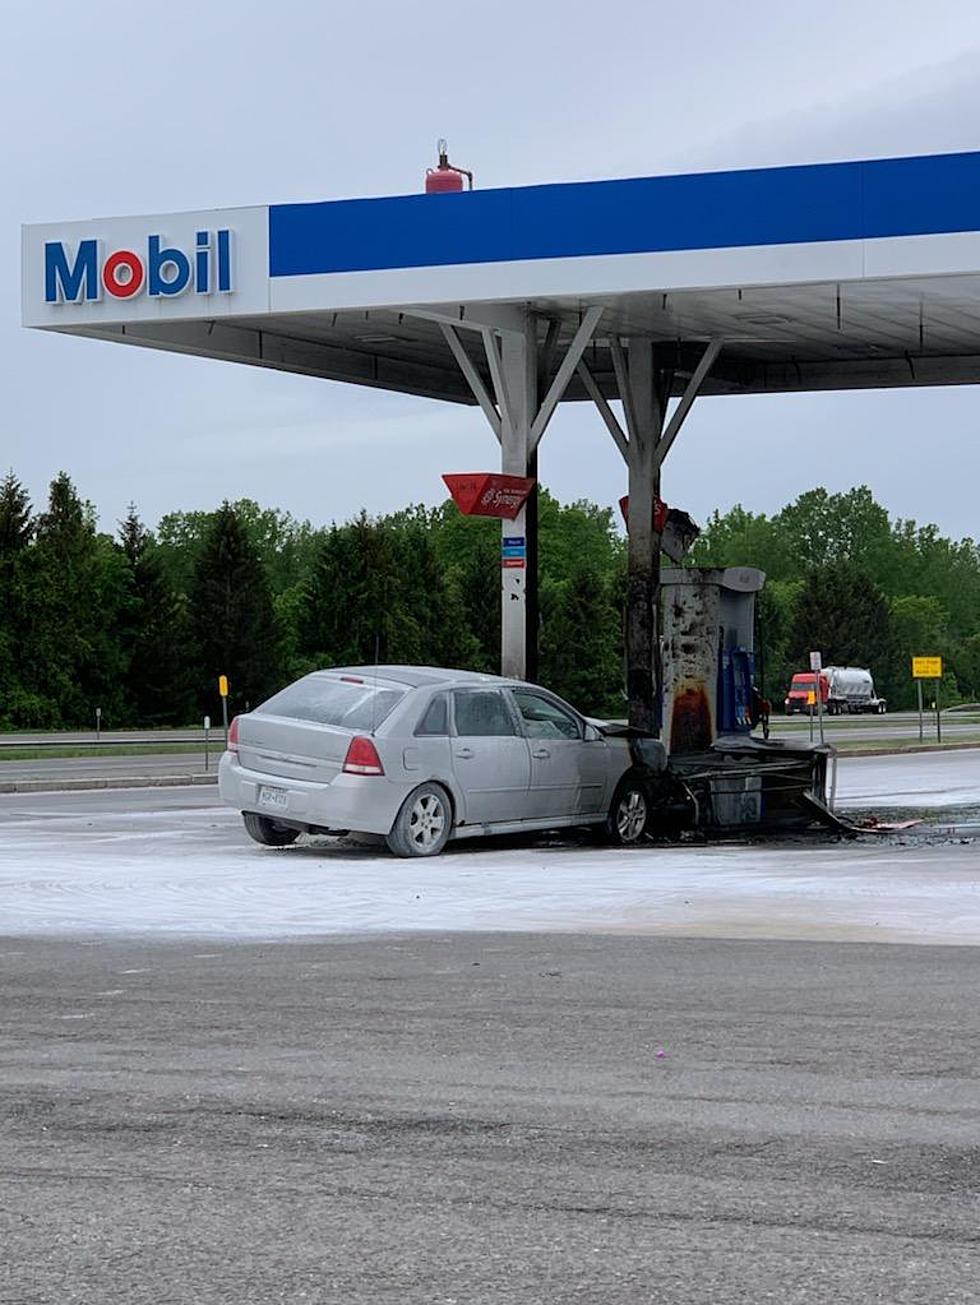 Schuyler Thruway Gas Pump Hit By Car, Goes Up in Flames 